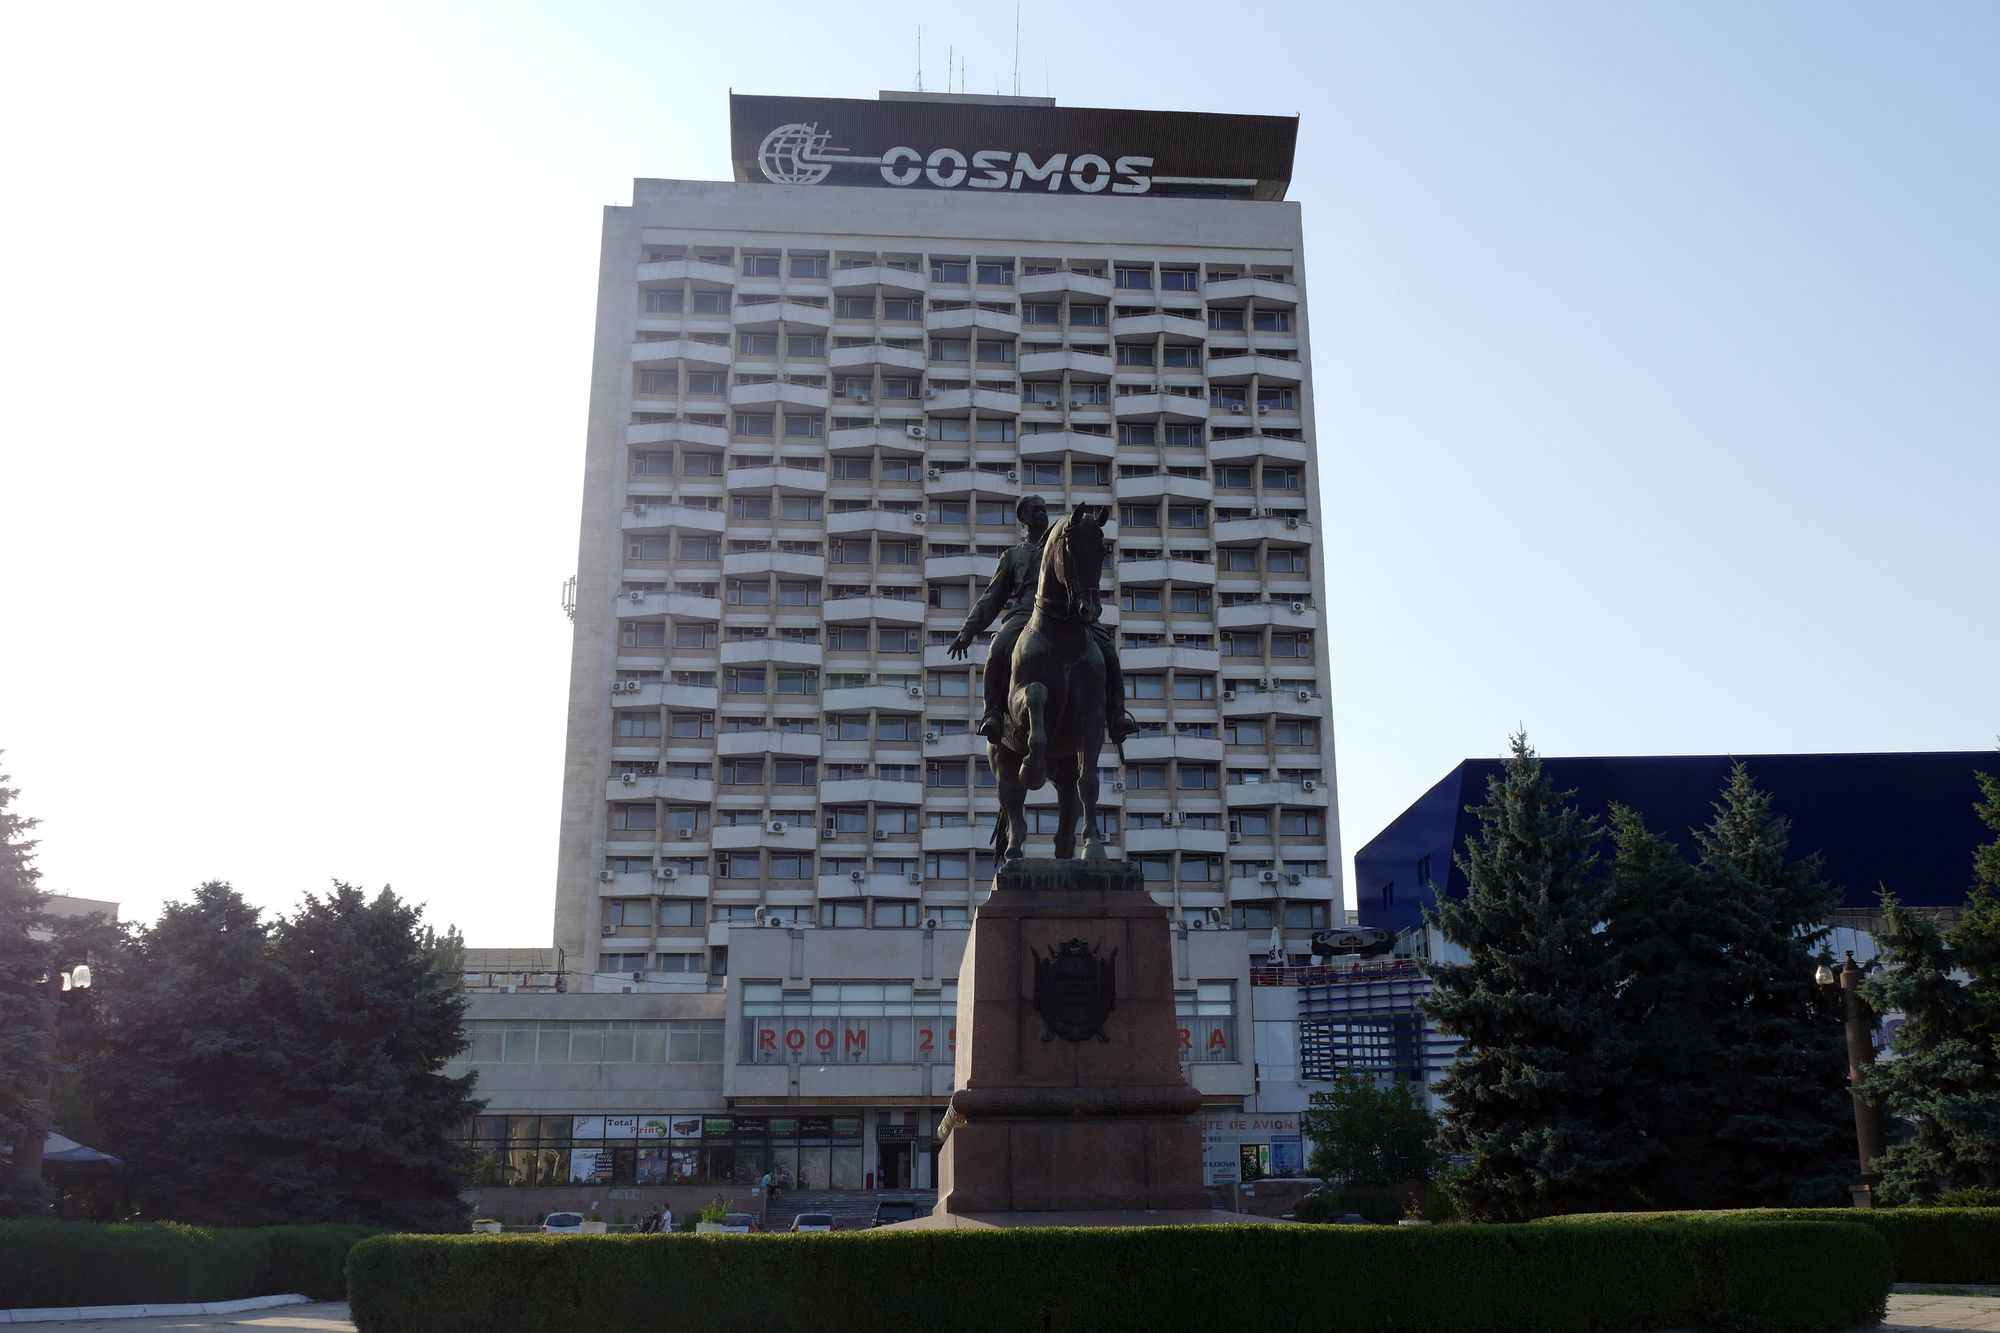 Hotel Cosmos Chisinau. Image: Maxence under a CC License